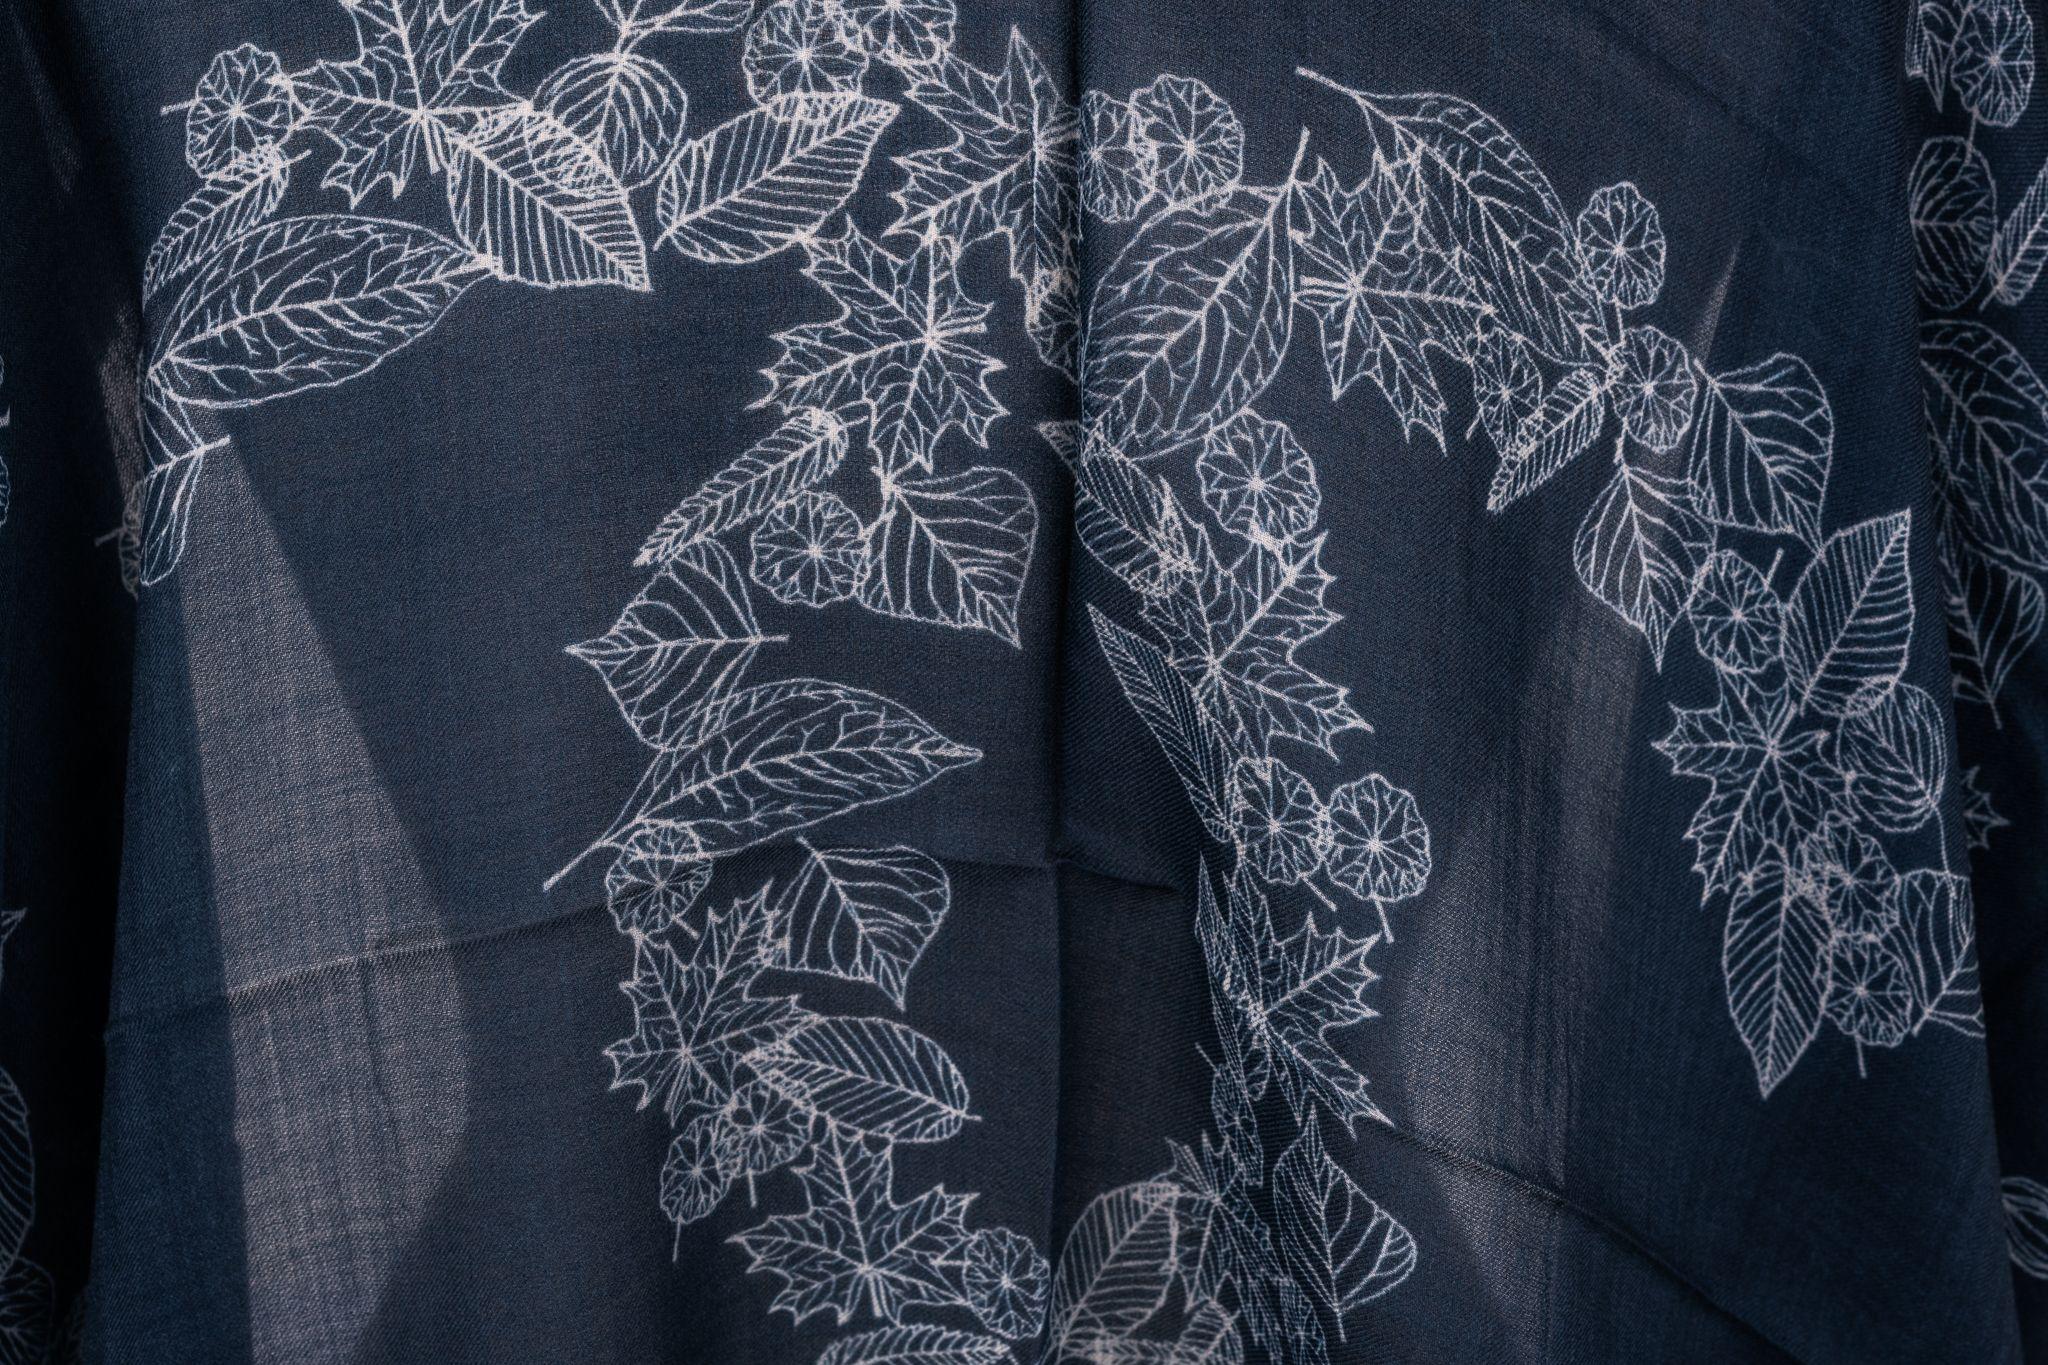 Chanel New Cashmere Shawl Navy Leaves In New Condition For Sale In West Hollywood, CA